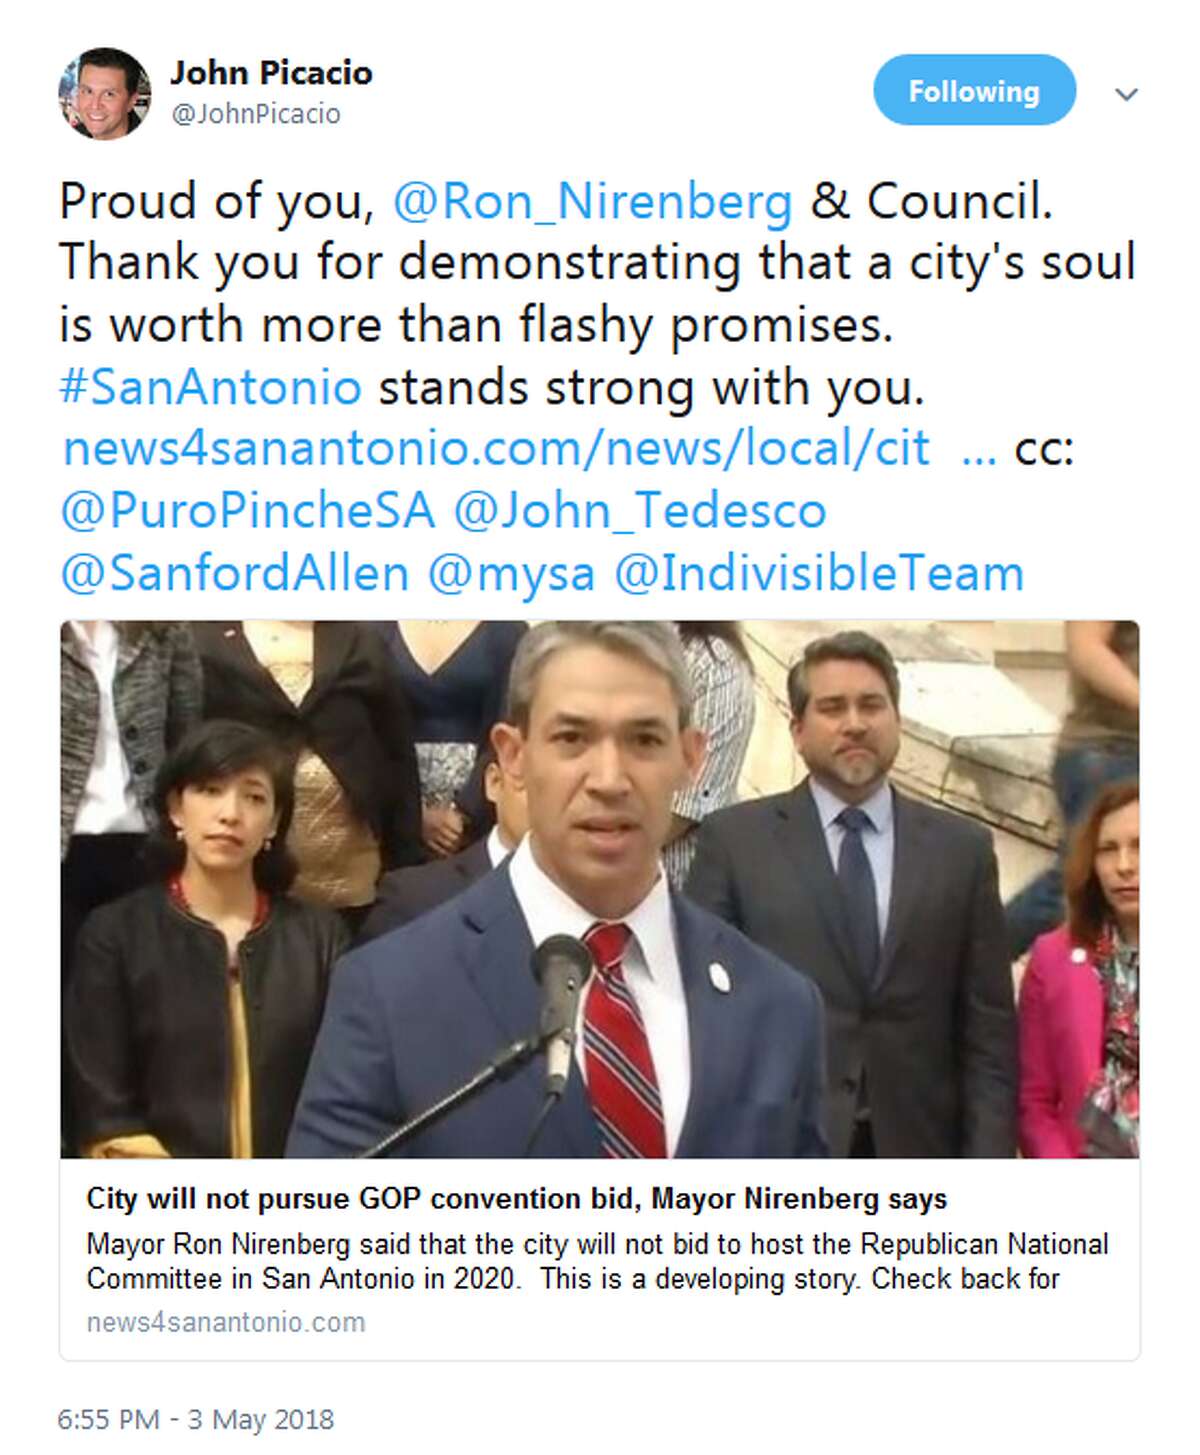 @JohnPicacio: Proud of you, @Ron_Nirenberg & Council. Thank you for demonstrating that a city's soul is worth more than flashy promises. #SanAntonio stands strong with you.